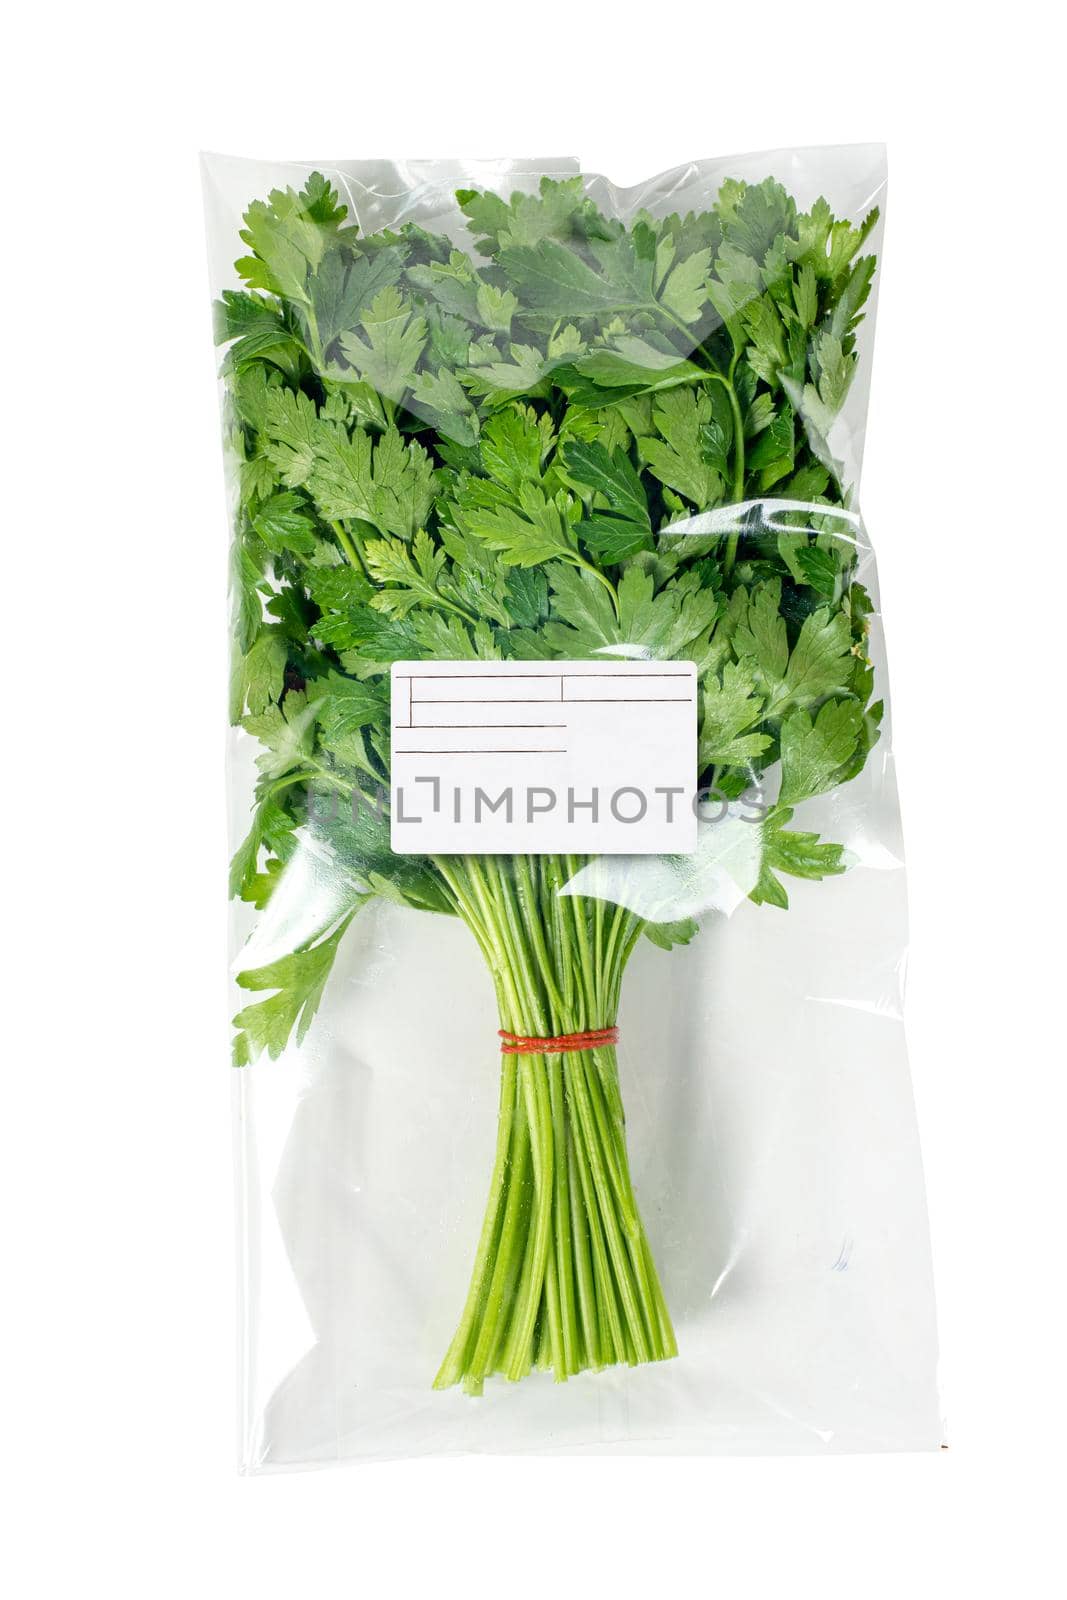 Packaged and labeled organic parsley on a white background by Sonat